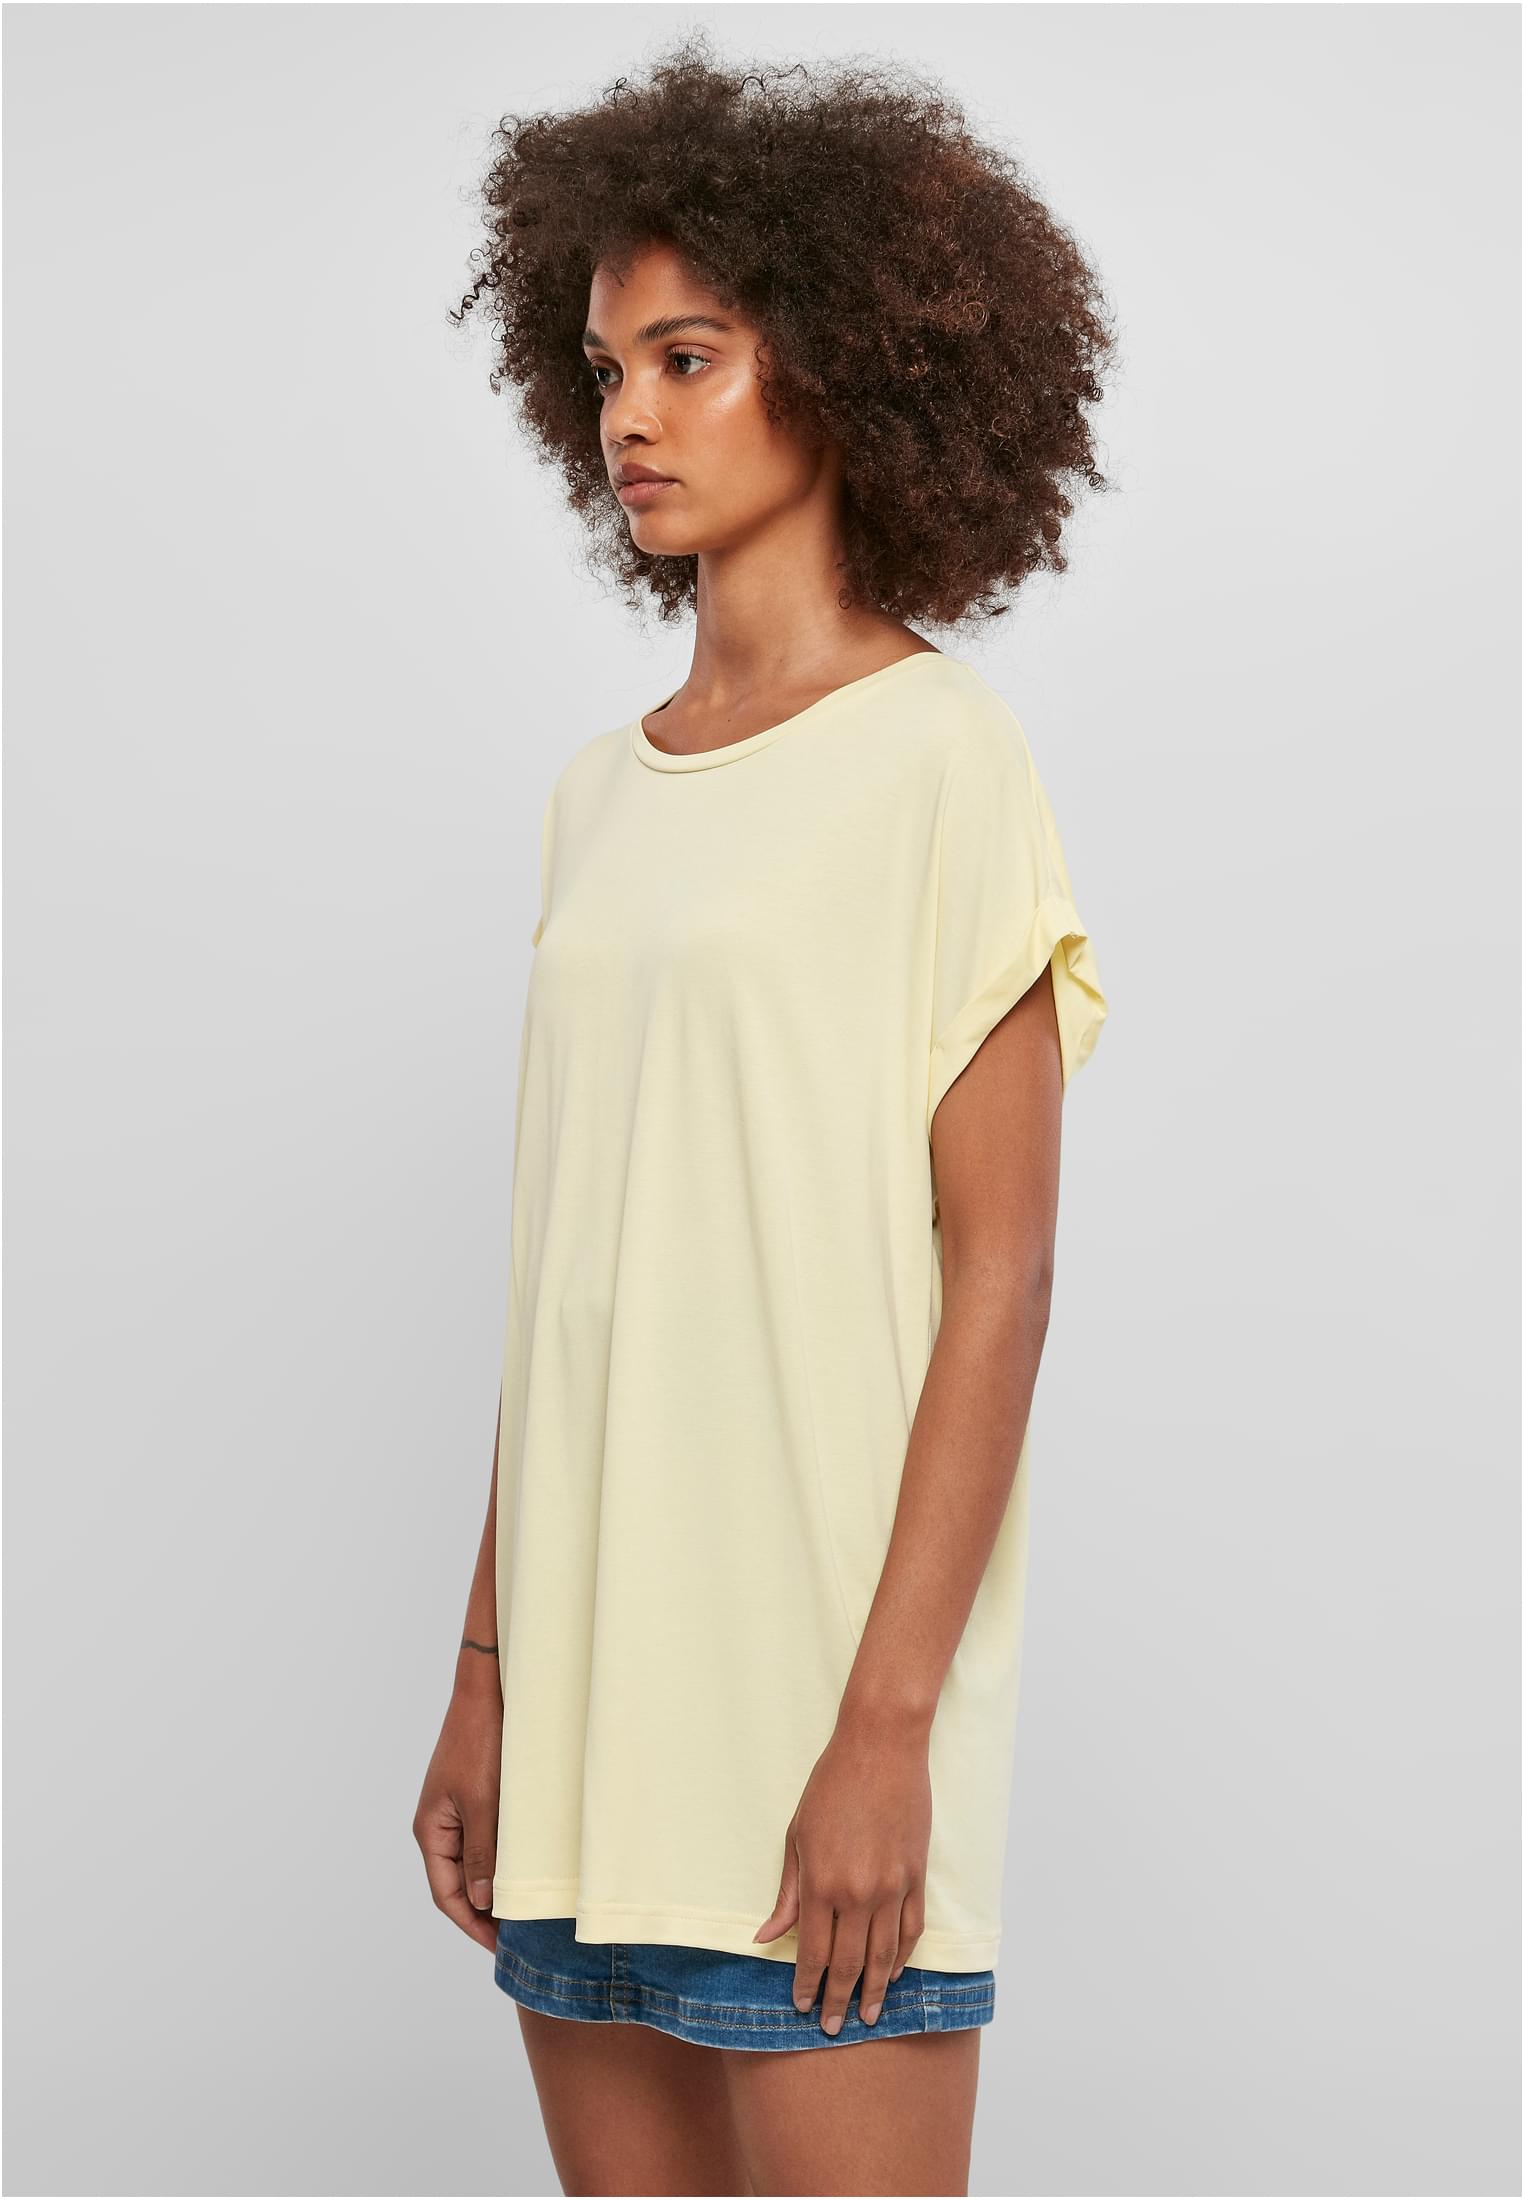 Frauen Ladies Modal Extended Shoulder Tee in Farbe softyellow